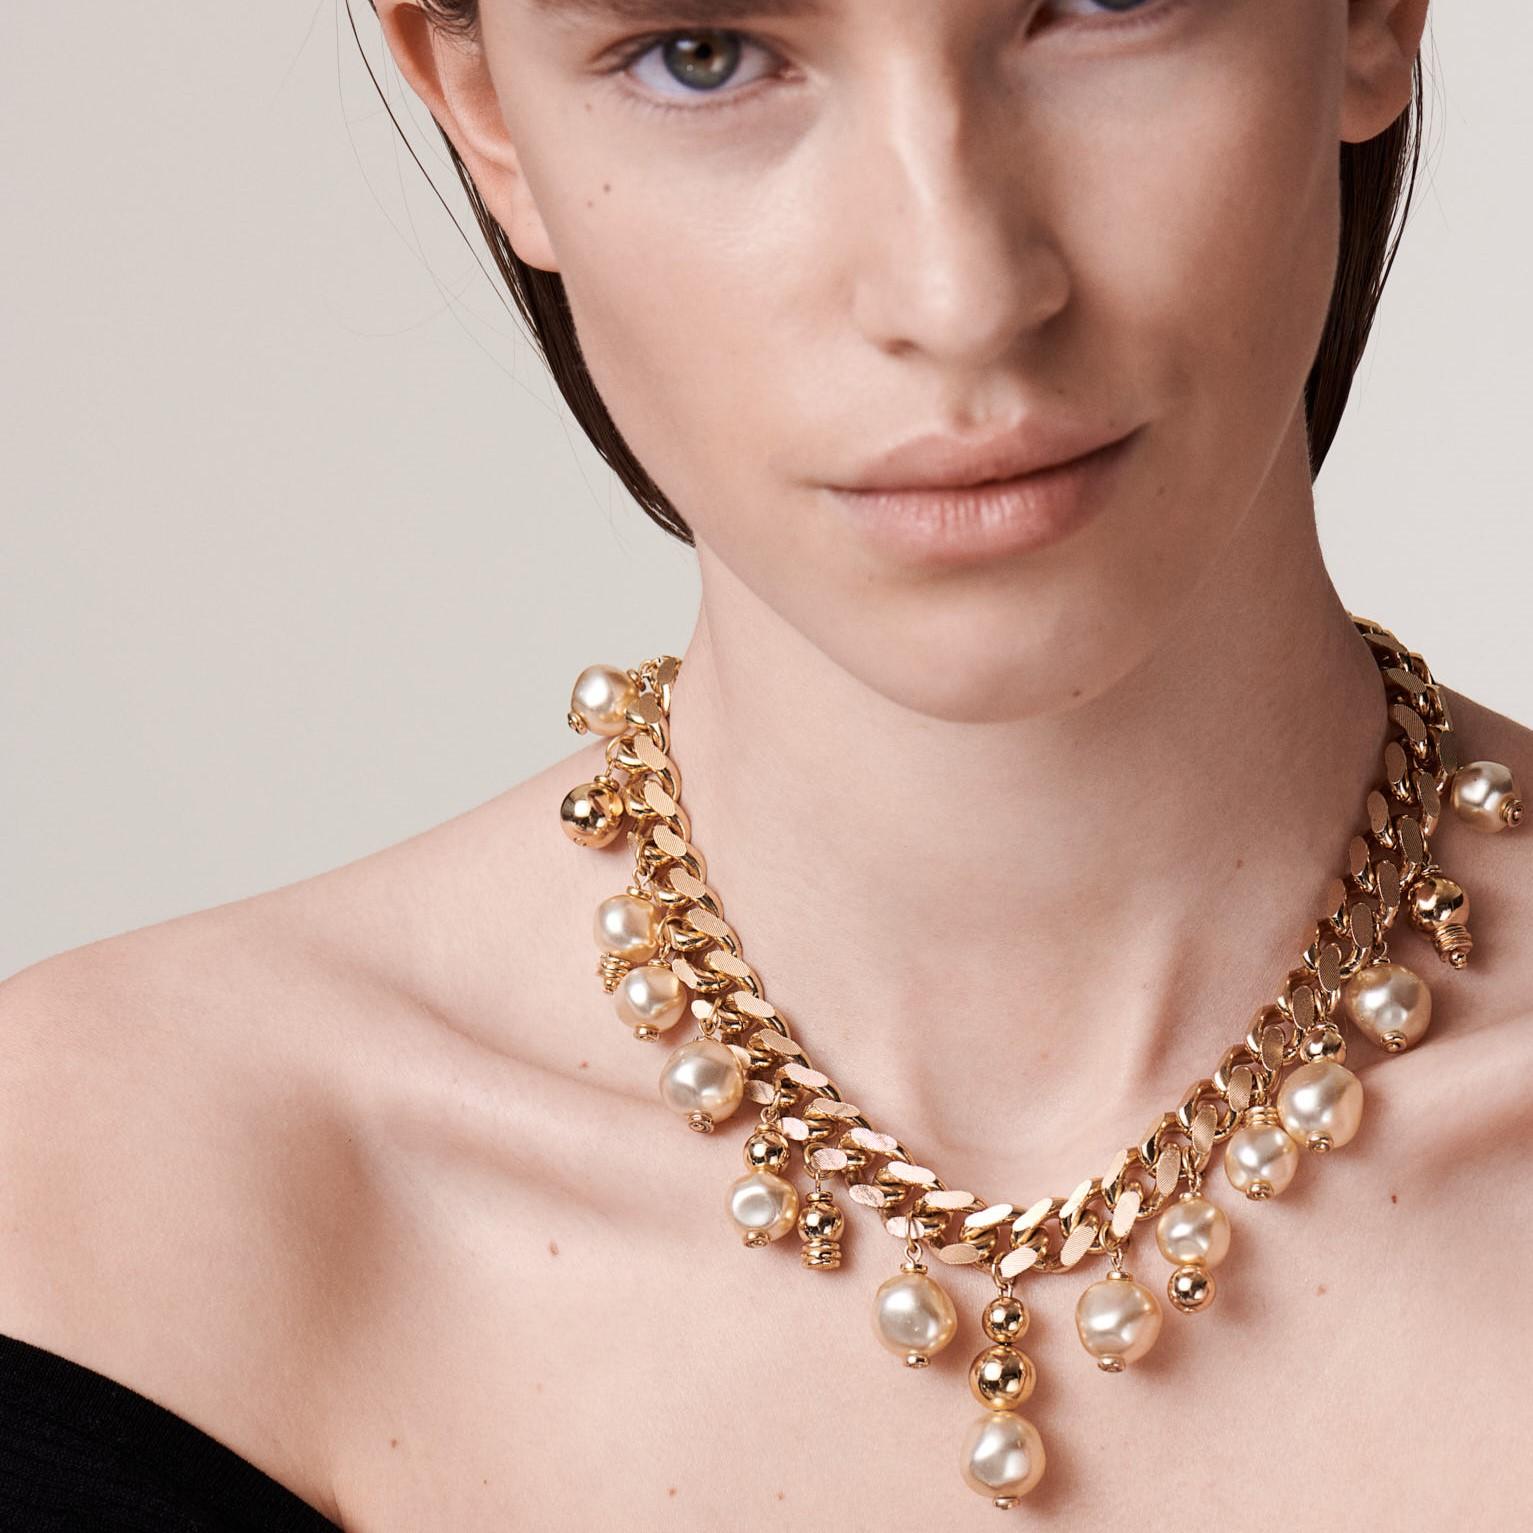 A stunning Vintage Dior Pearl Chain Necklace. Featuring a chunk flattened curb chain embellished with baroque style glass pearls and gold orbs in an asymmetric arrangement. Edgy and timeless, a perfect piece of Dior and total jewel box hero.
With